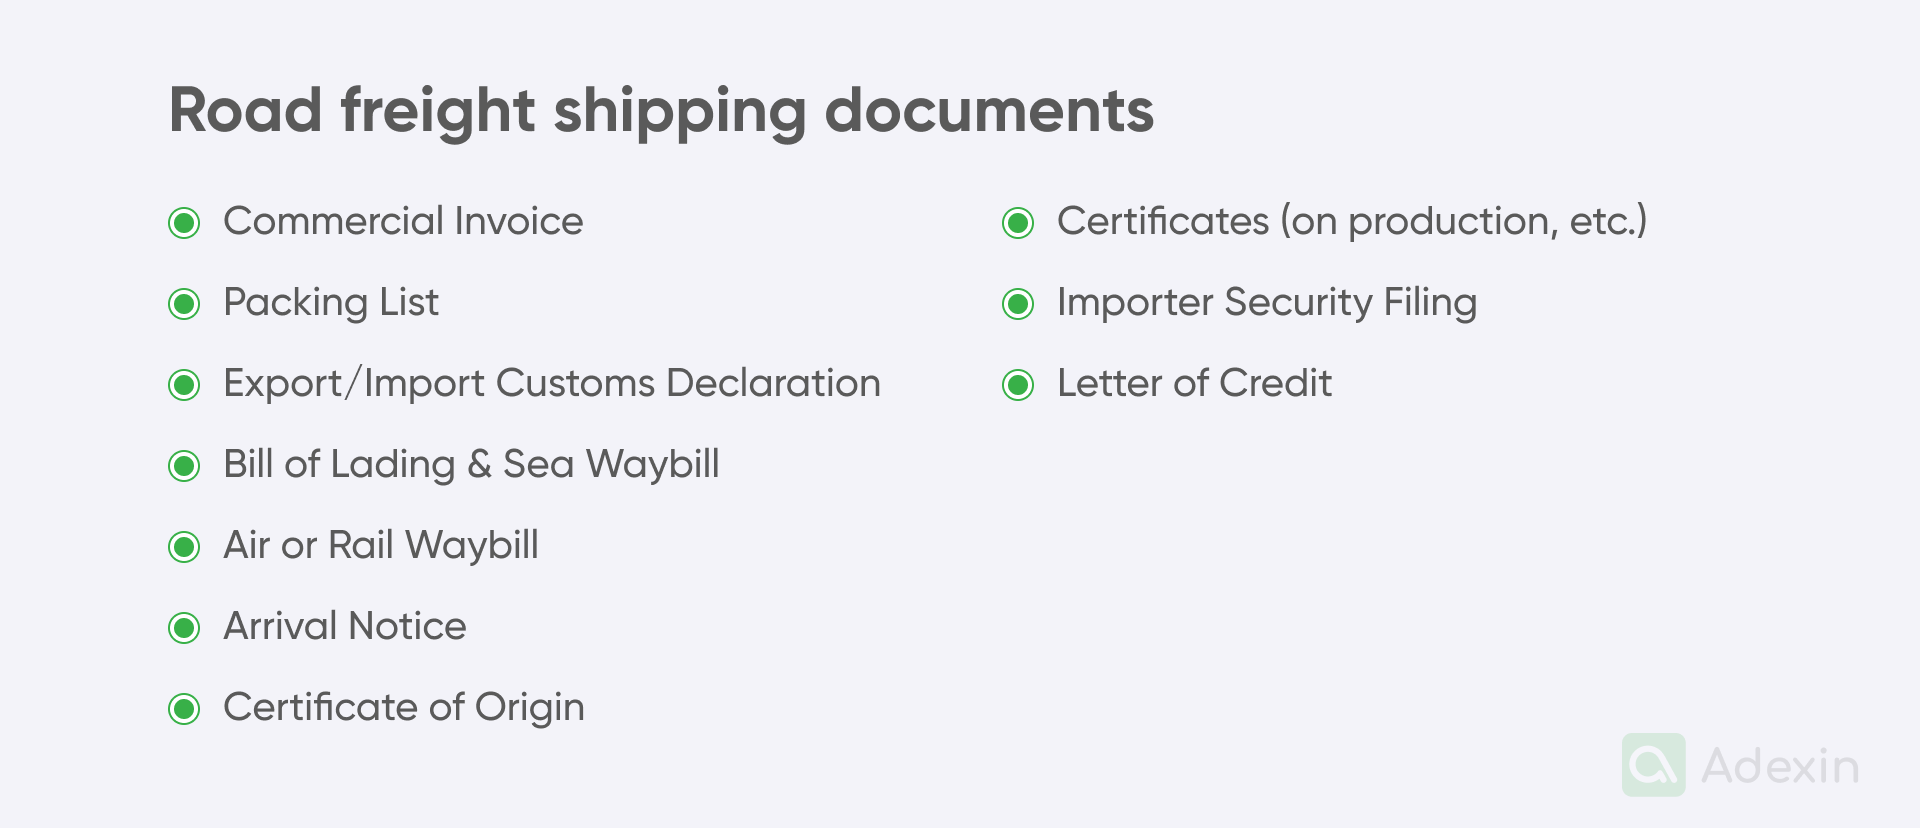 Road freight shipping documents